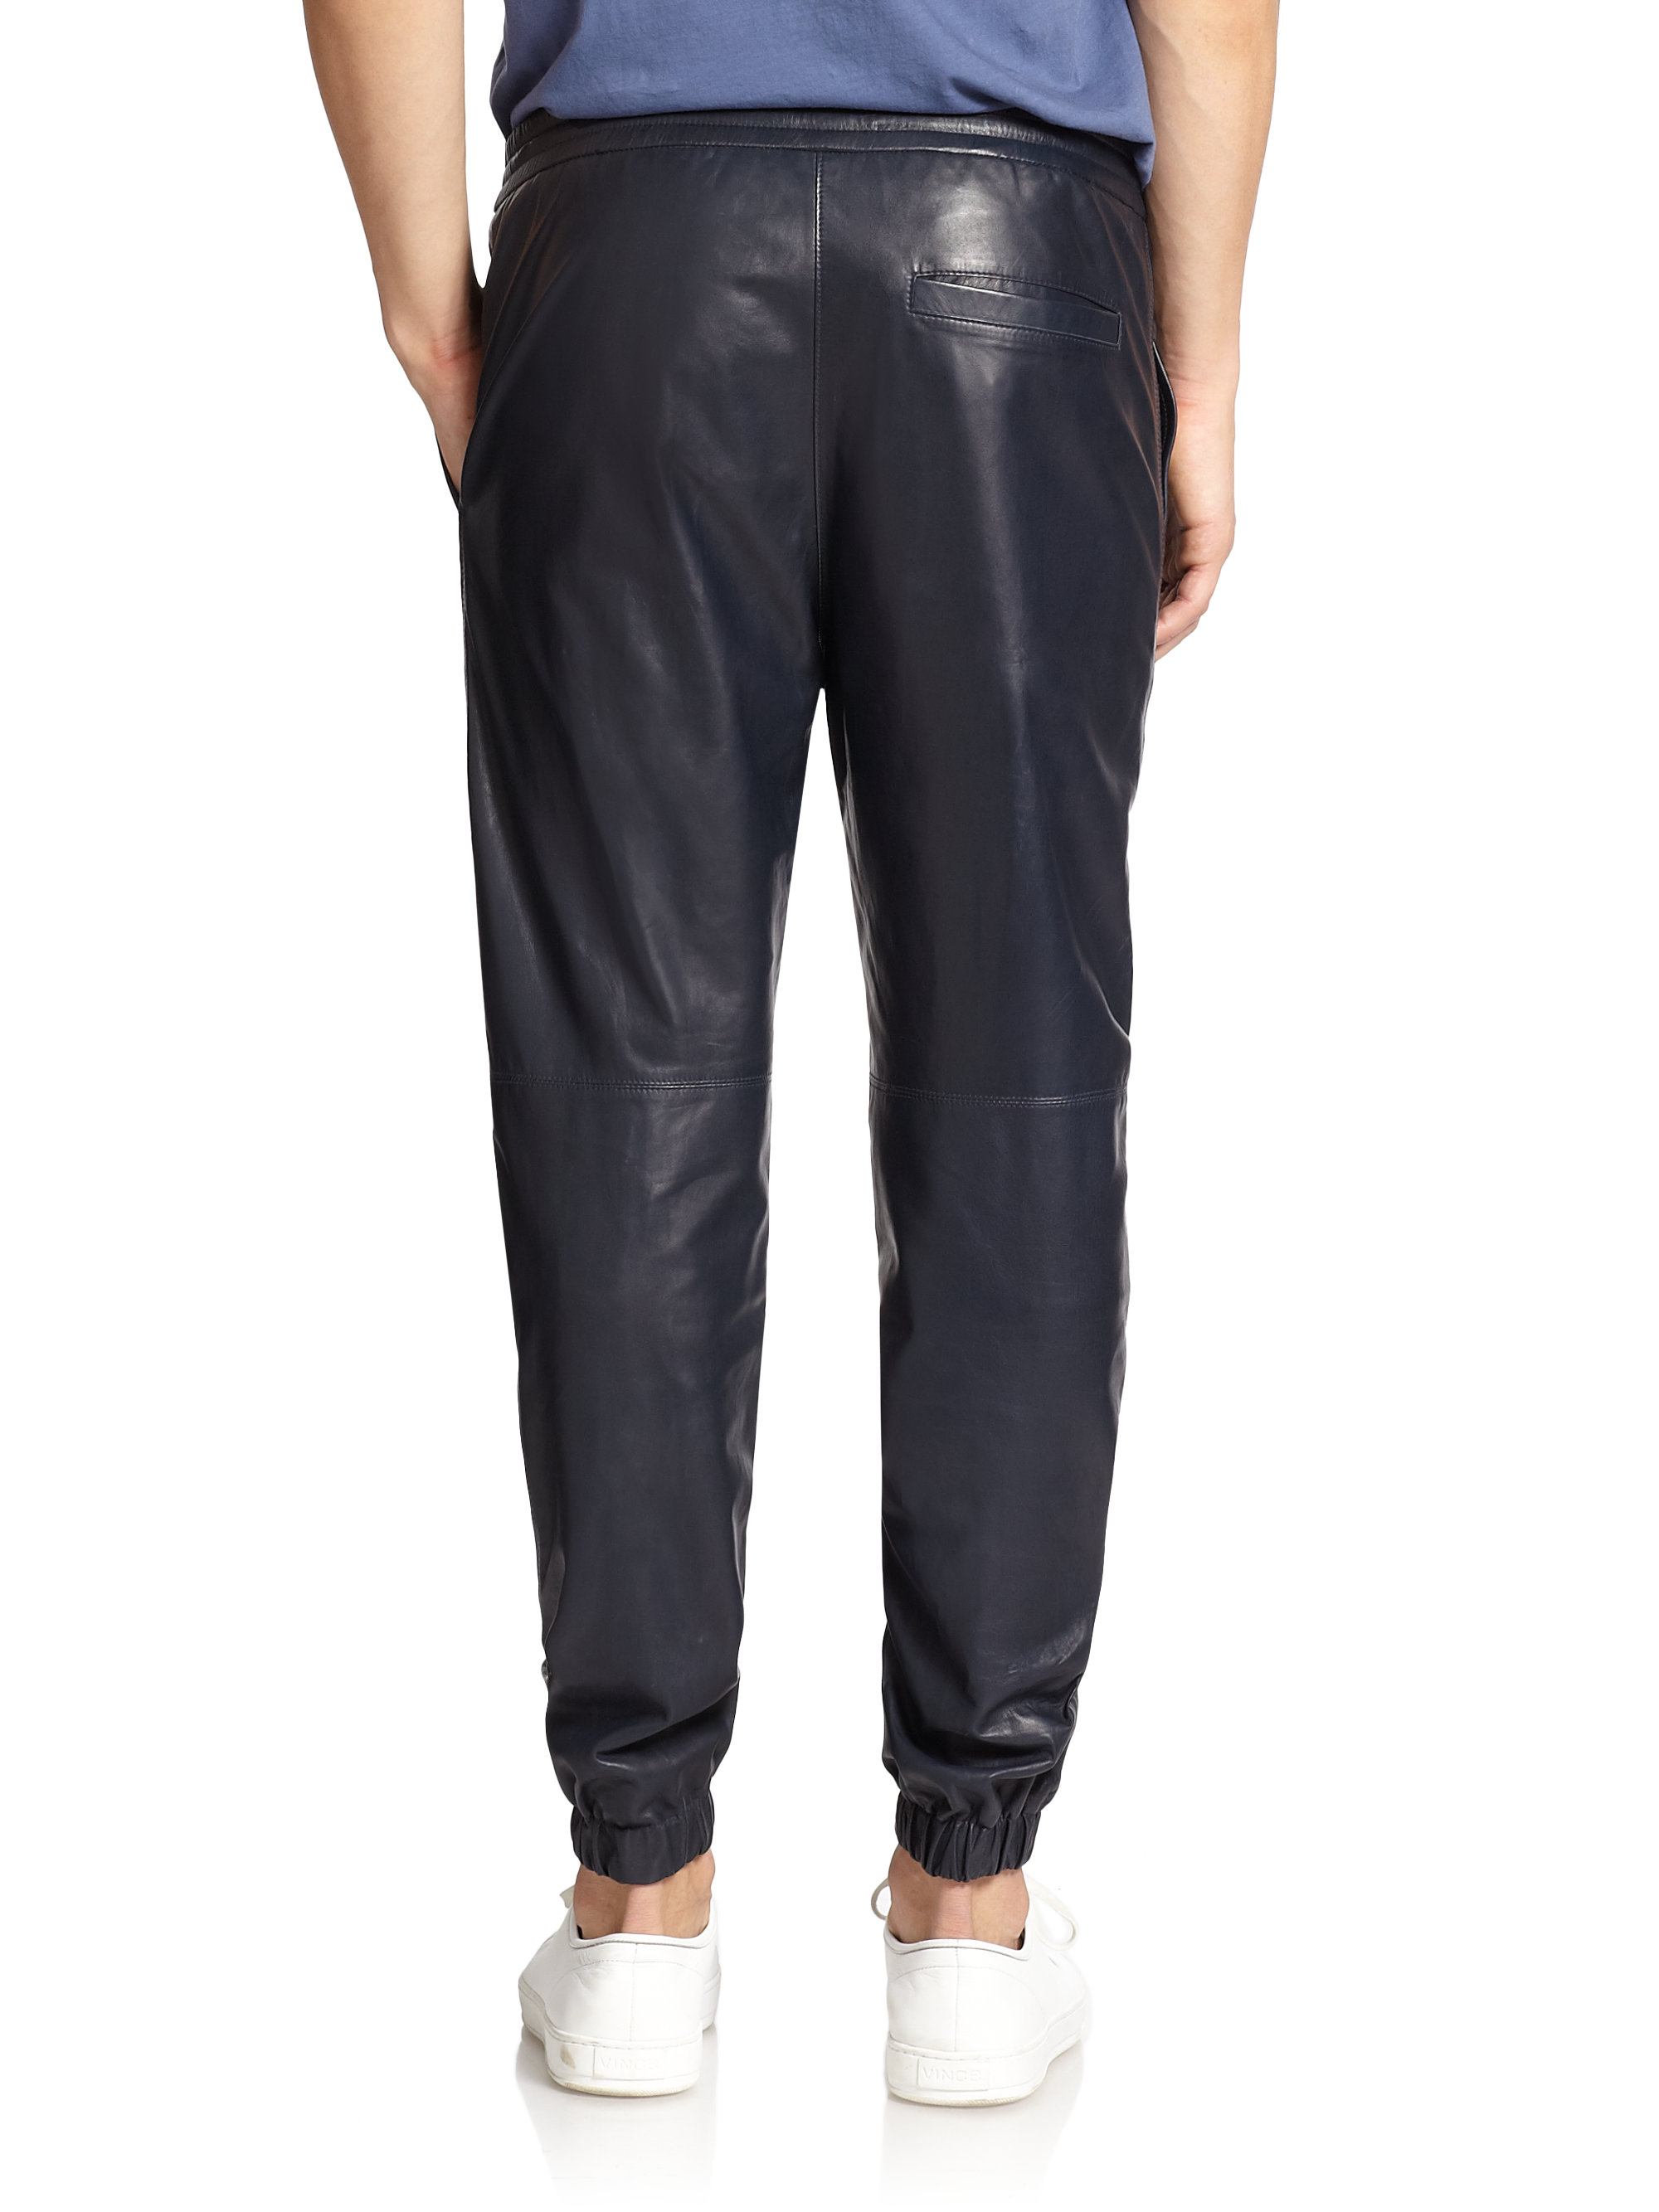 Vince Leather Jogger Pants in Blue for Men - Lyst